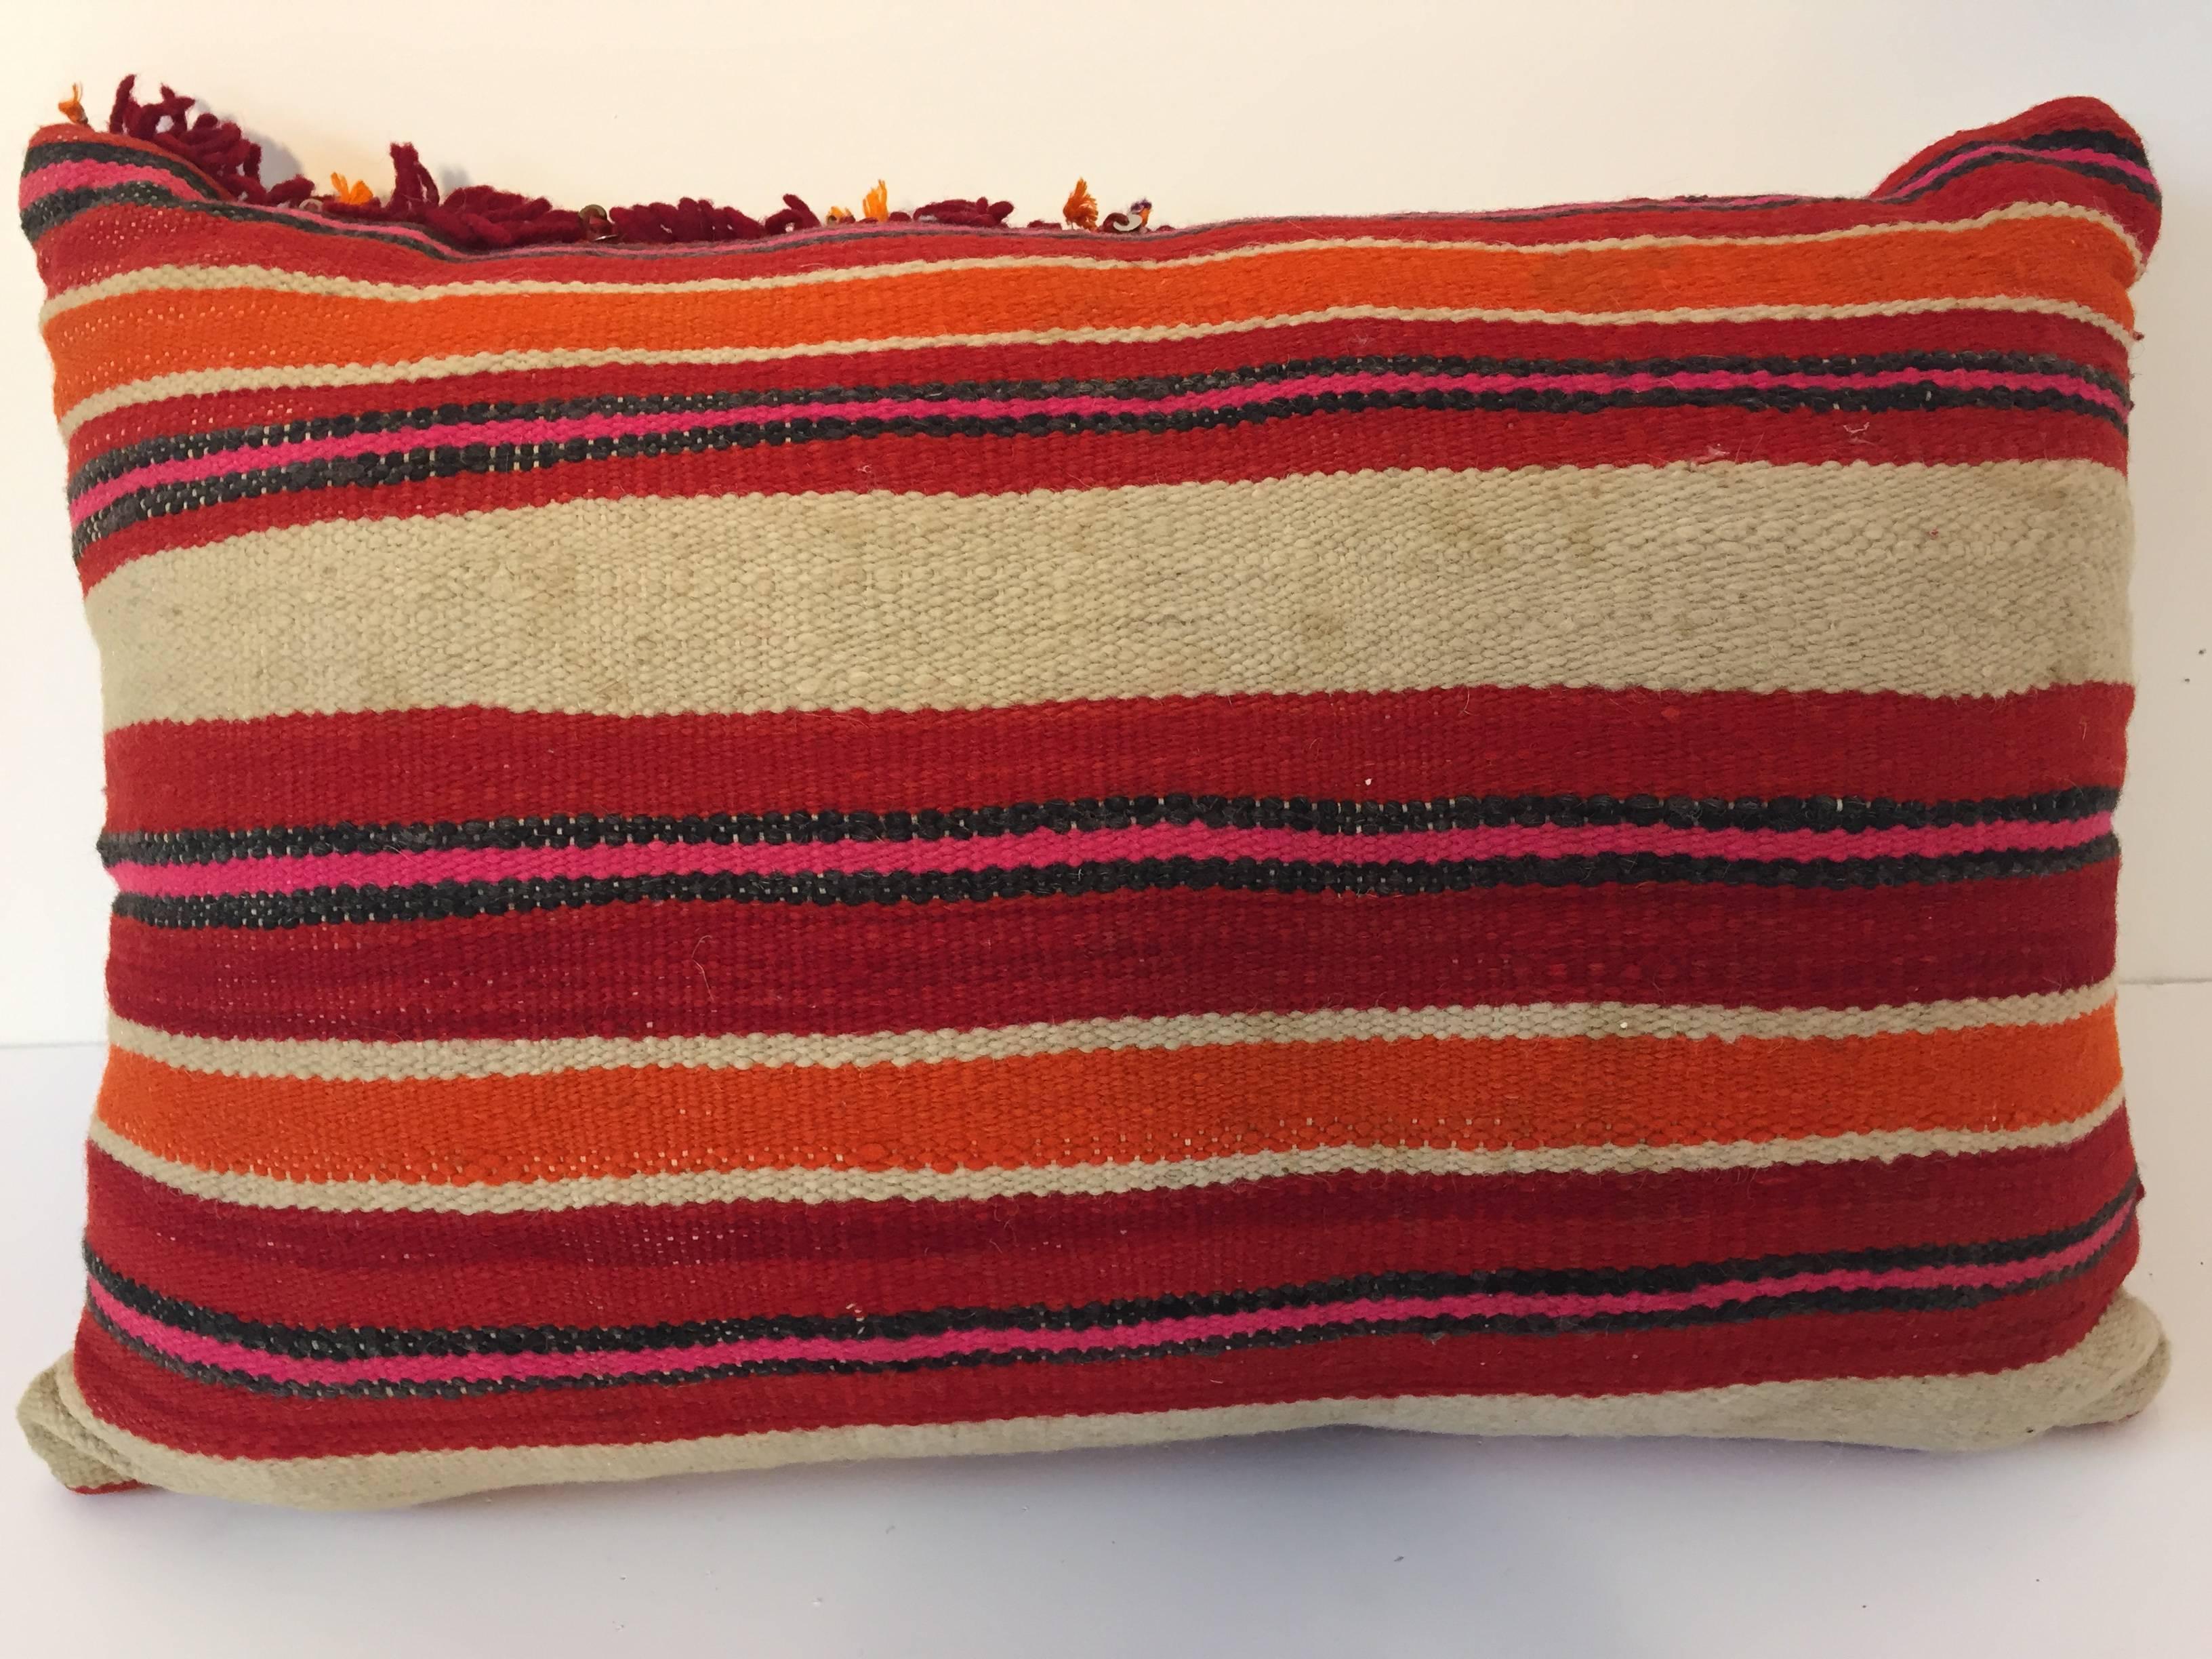 Vegetable Dyed Moroccan Berber Pillow with Tribal Designs Red and Ivory Color